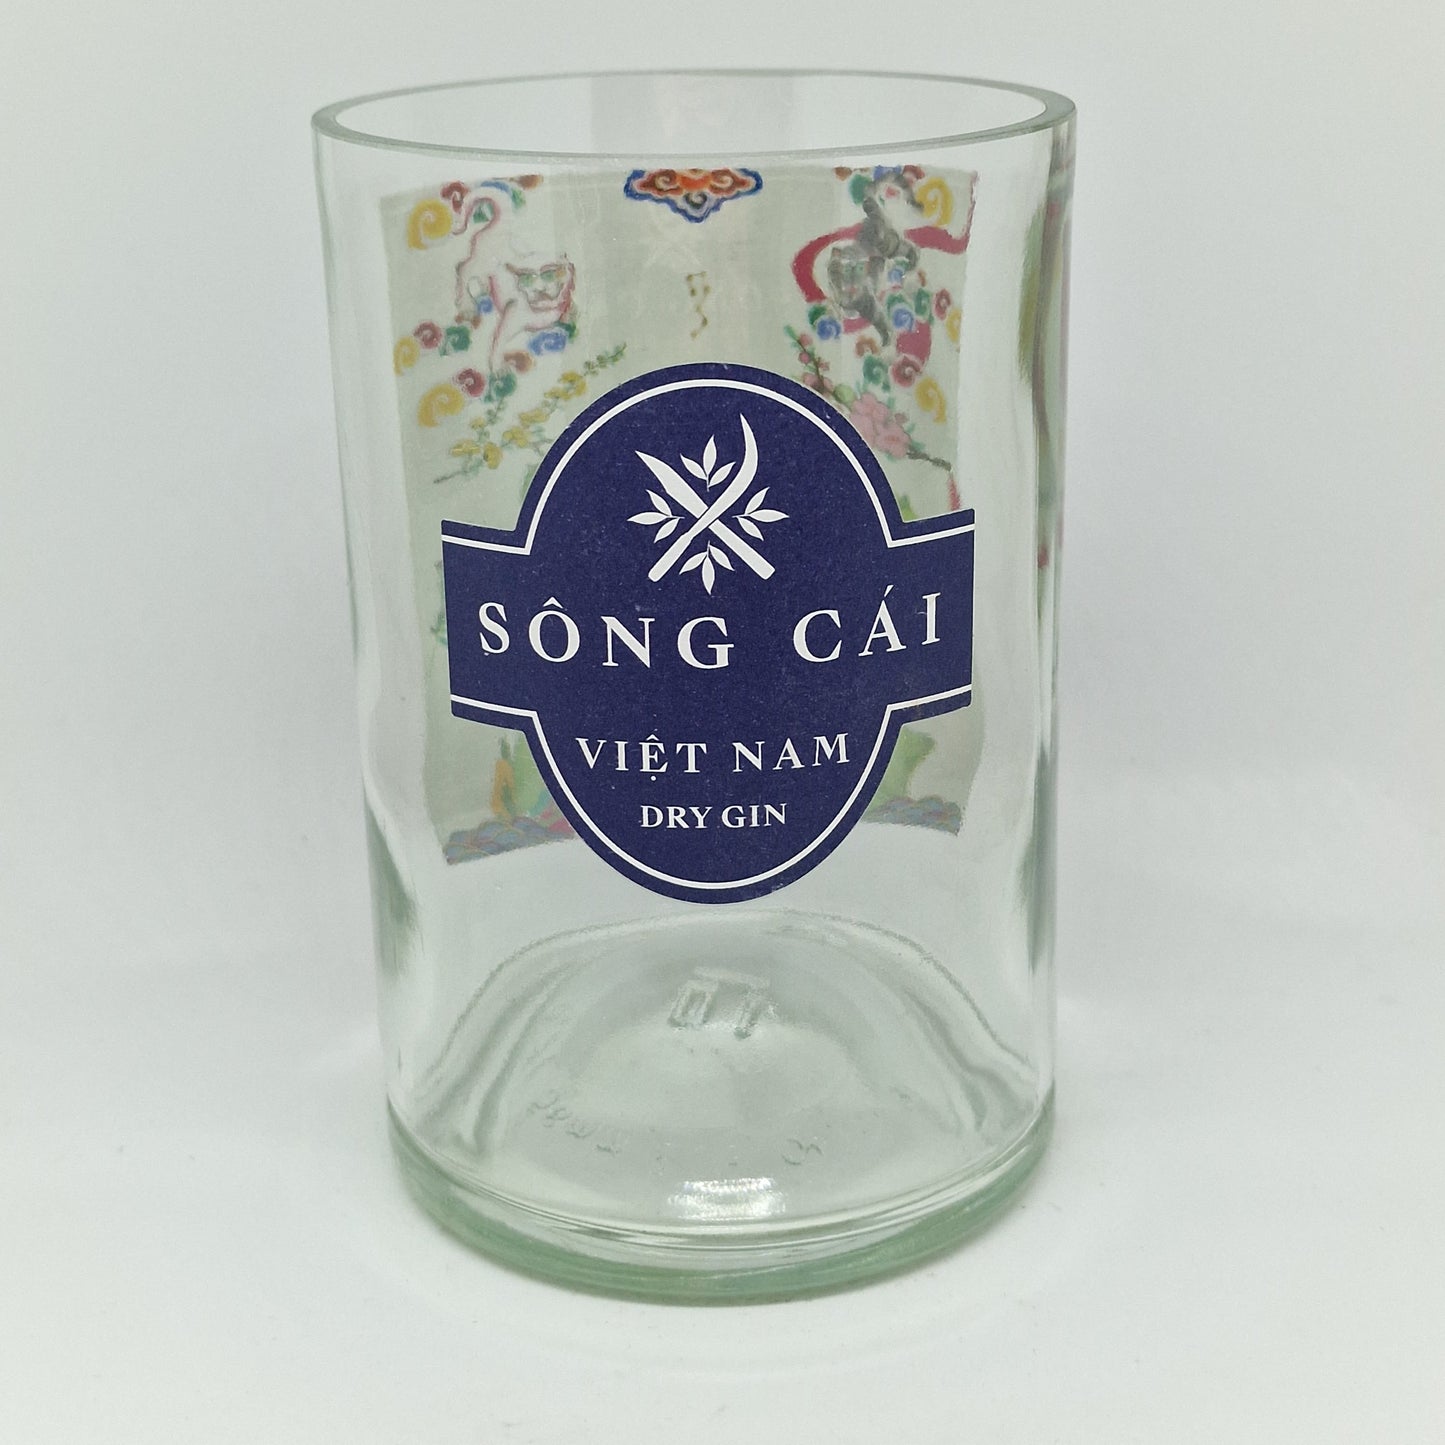 Song Cai Dry Gin Bottle Candle